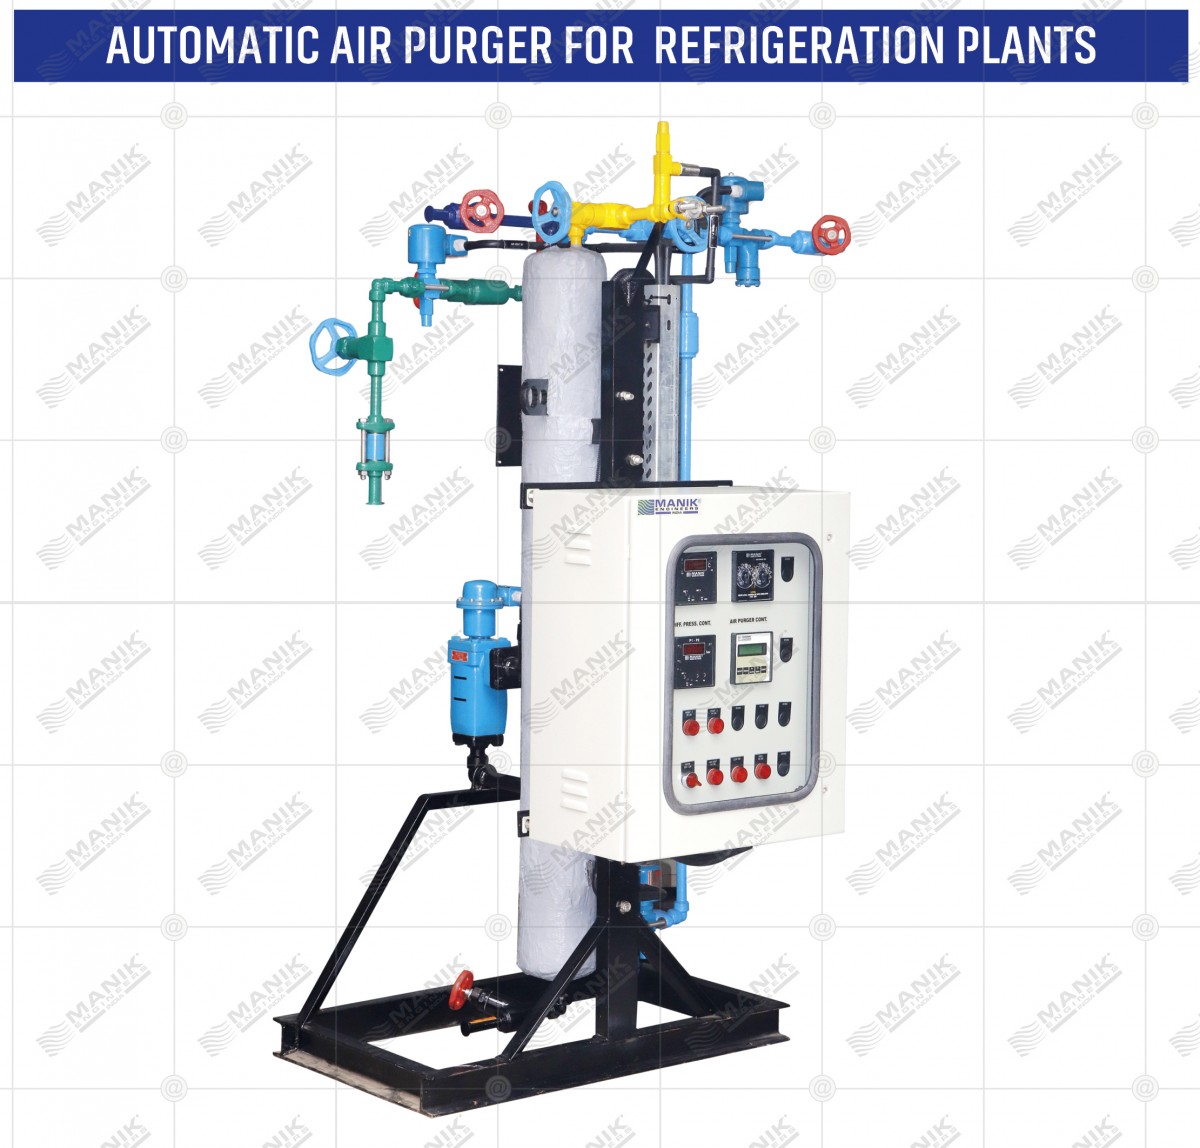 AUTOMATIC-AIR-PURGER-FOR-REFRIGERATION-PLANTS 